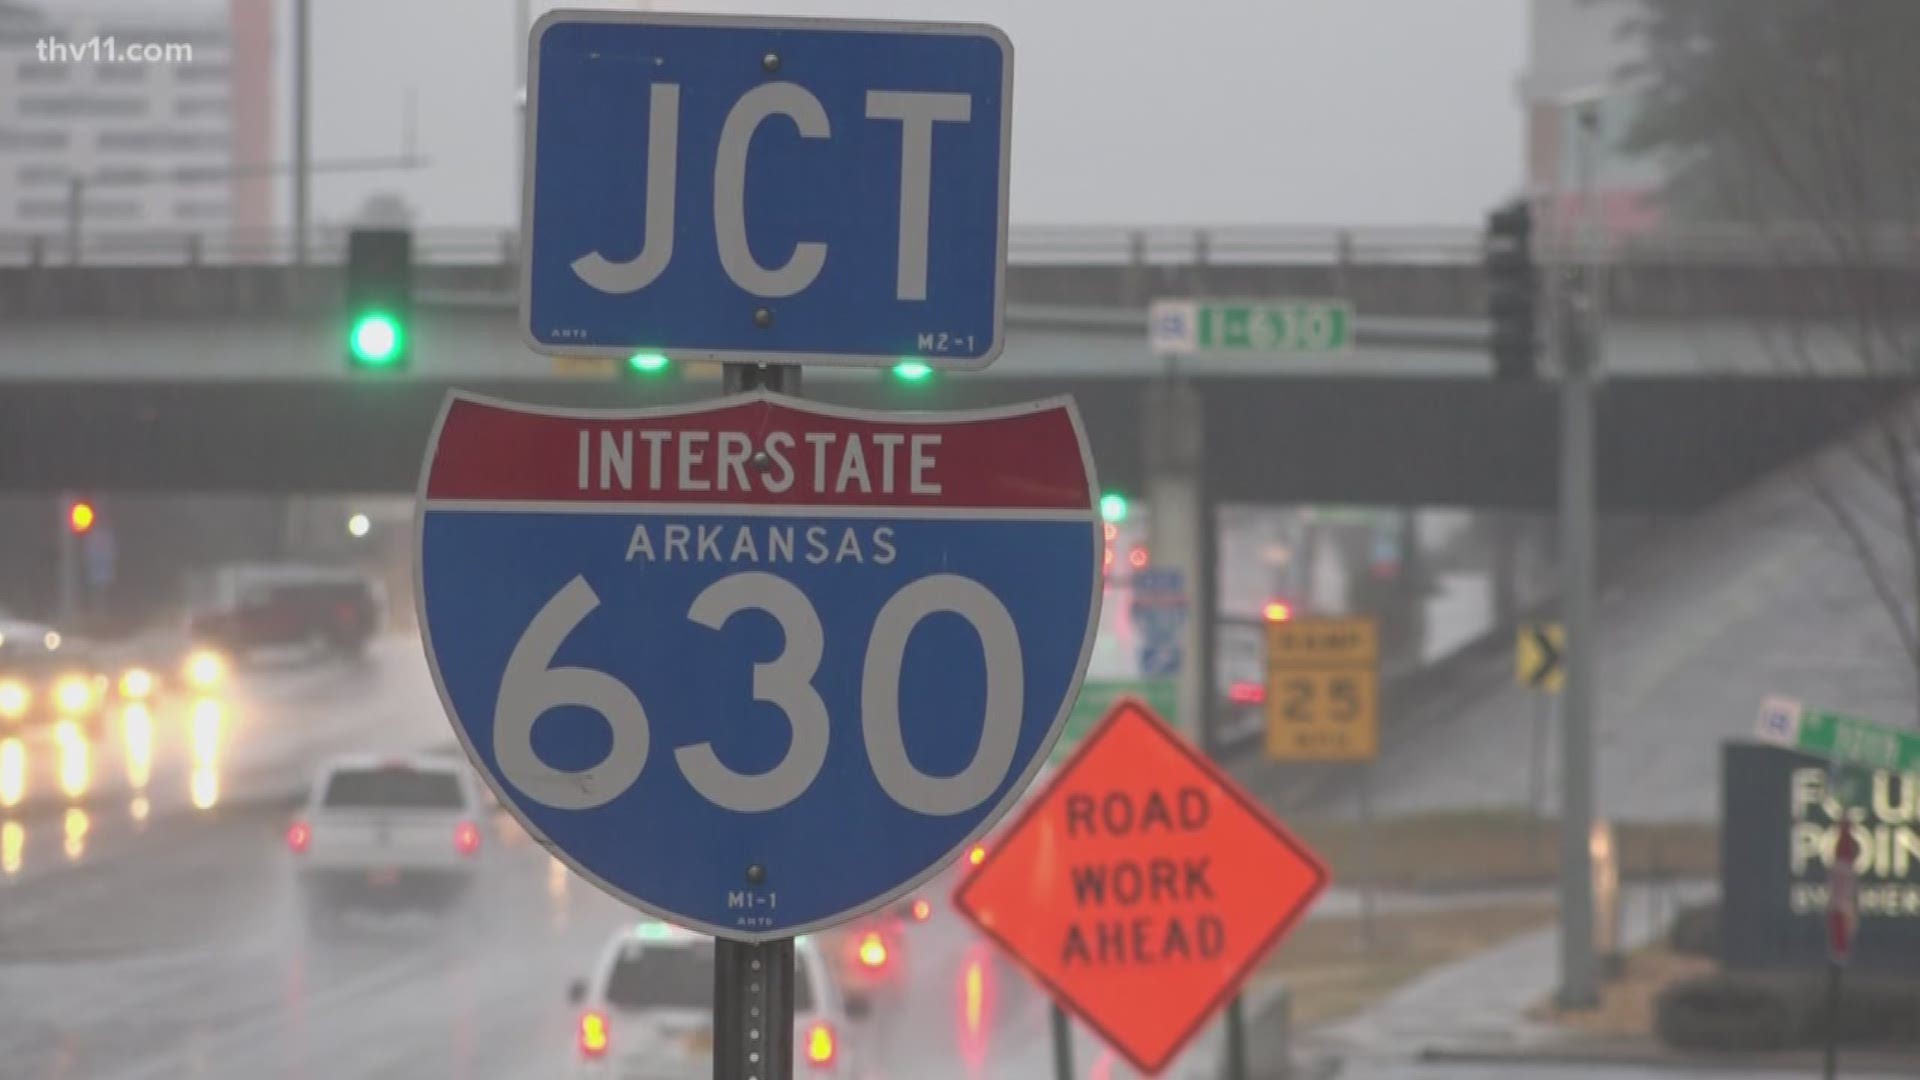 A major upcoming traffic alert in Little Rock this weekend. Interstate 630 gets cut down to one lane in both directions between Fair Park Boulevard and Baptist Health Drive starting tomorrow.